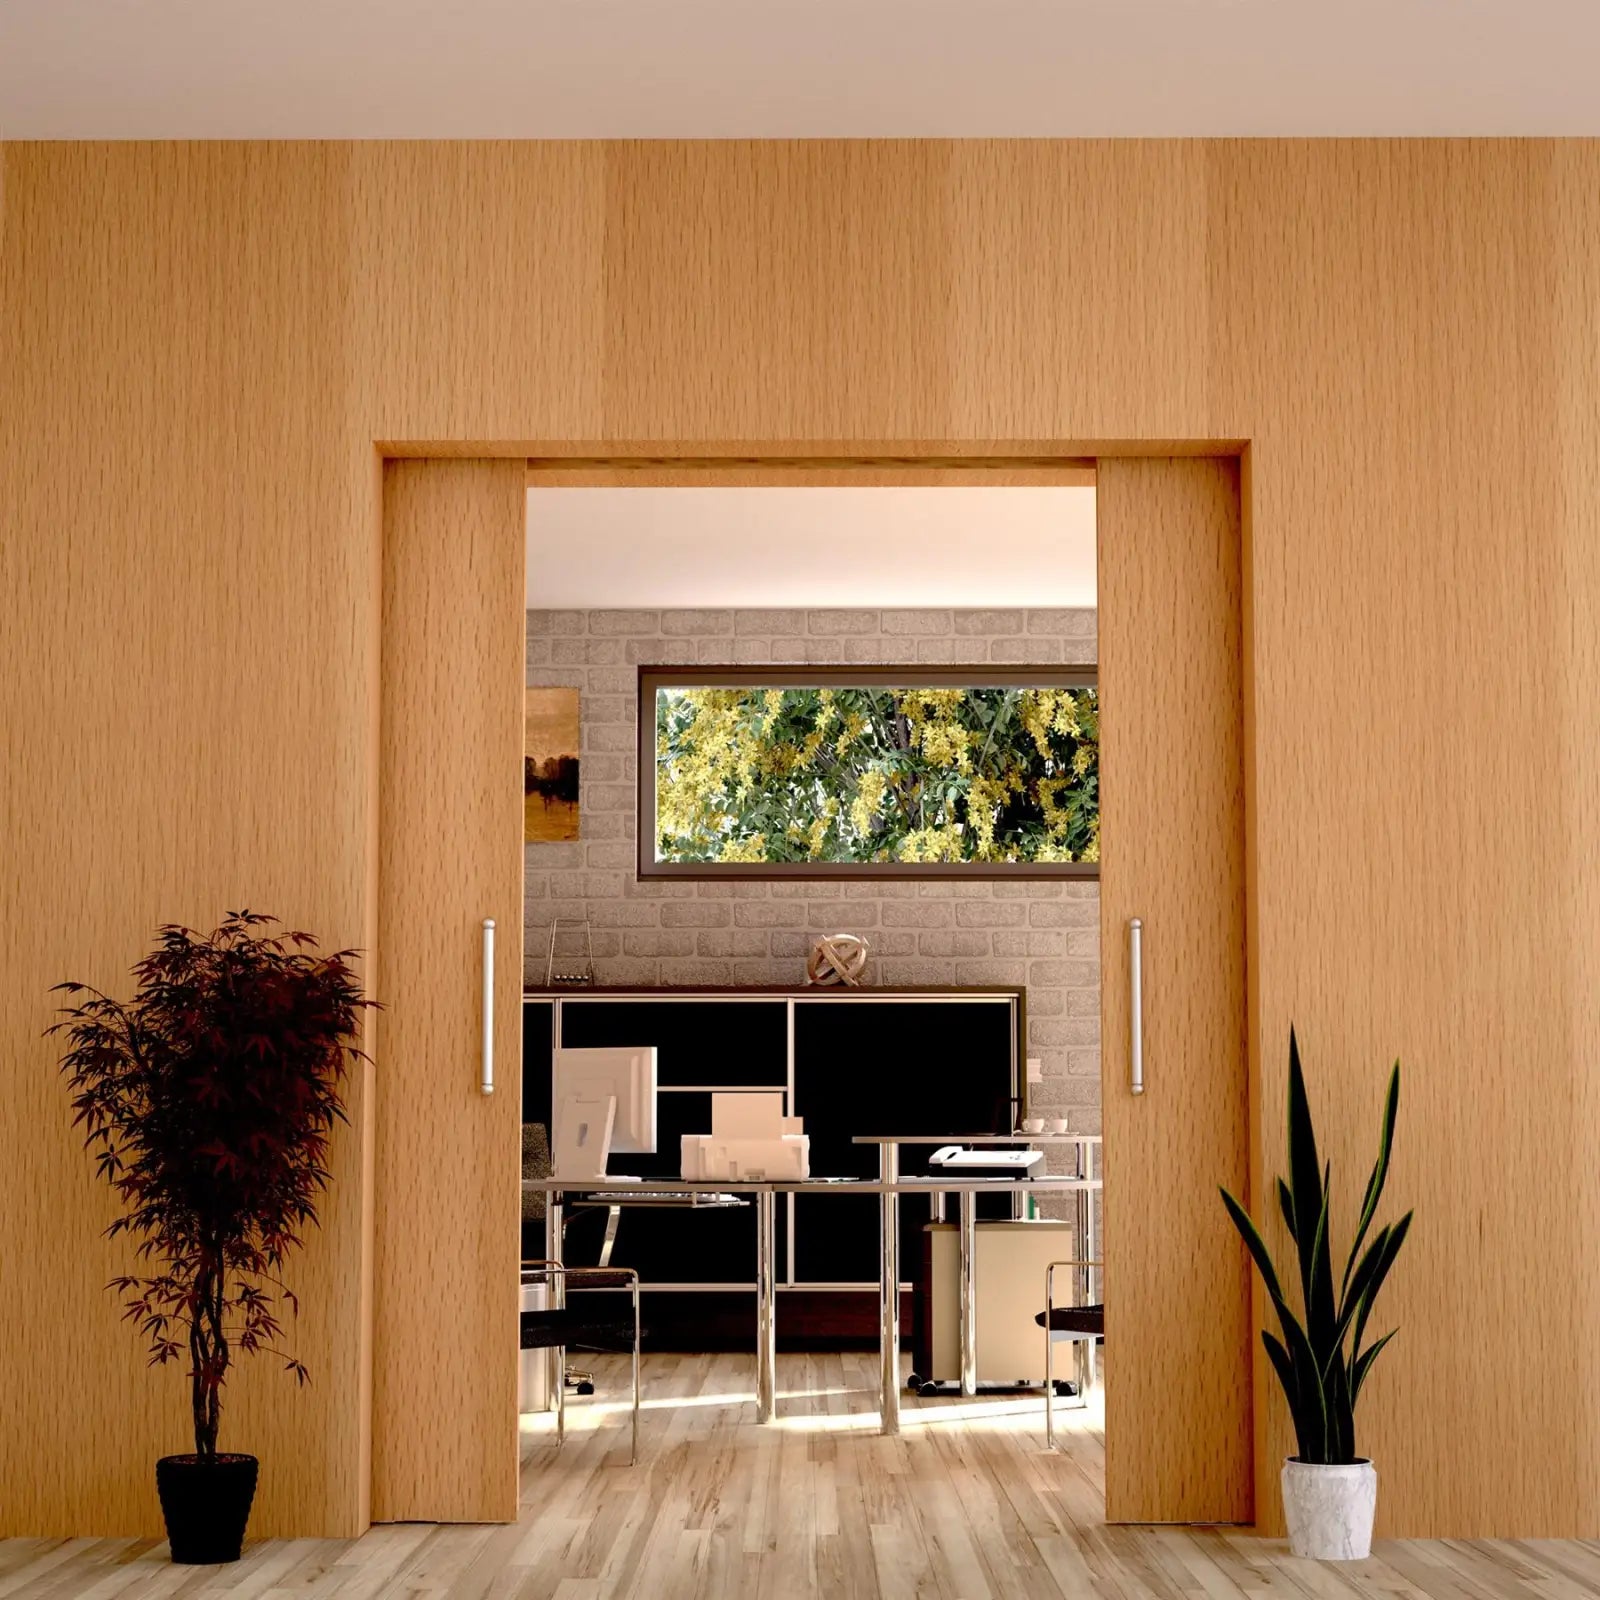 DS-Slide Double Synchro Sliding Door Kit - 6000mm Track - Both Way Soft Close - Decor And Decor